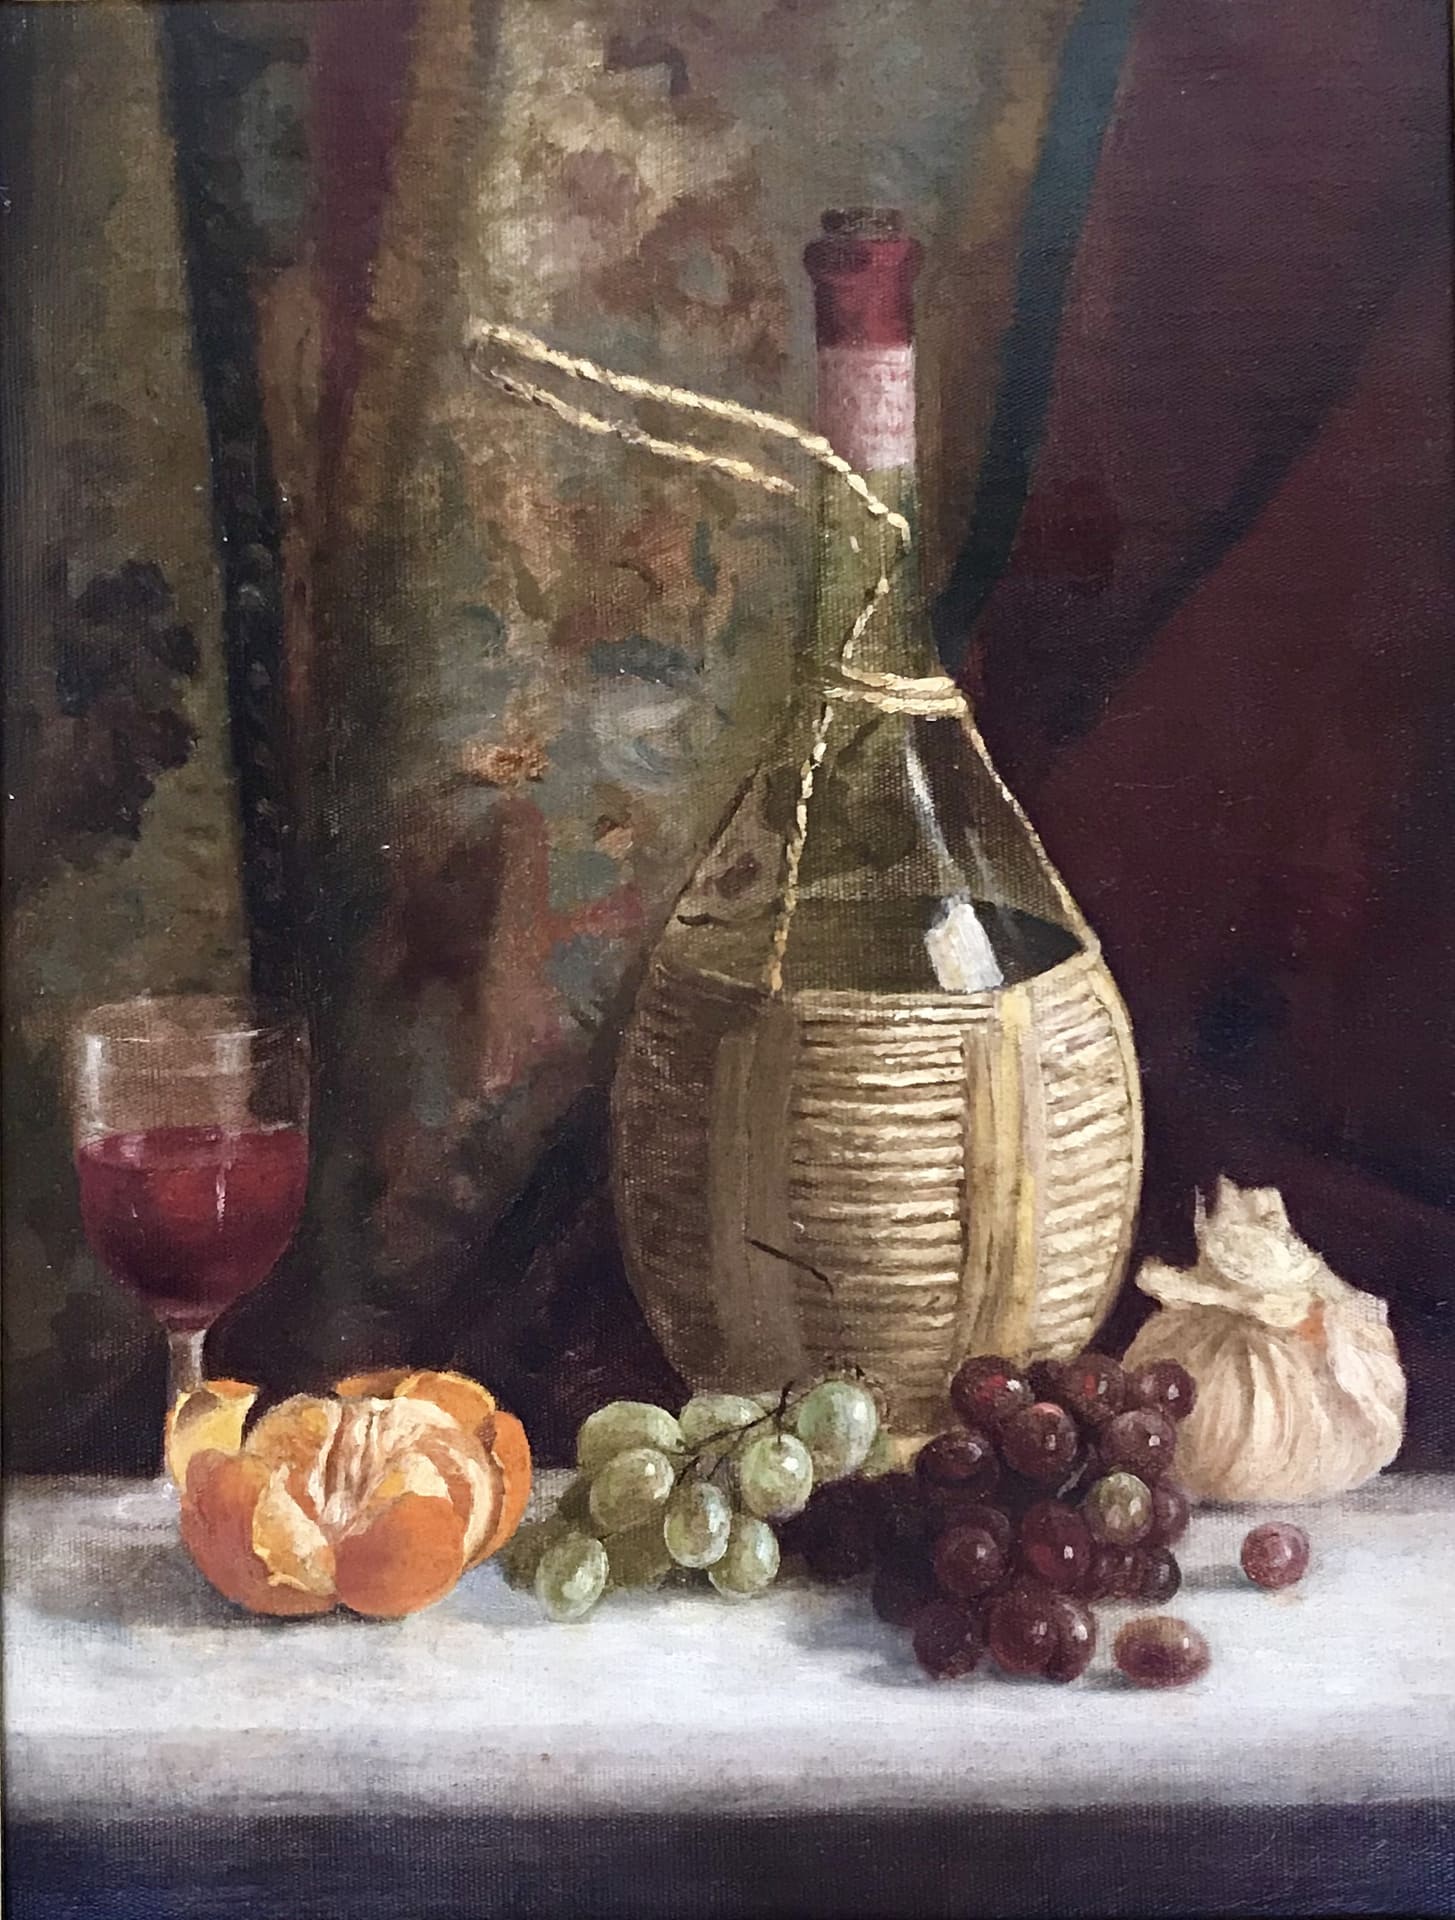 Cornelius Hankins' Still Life of Grapes, oranges, and a wine bottle